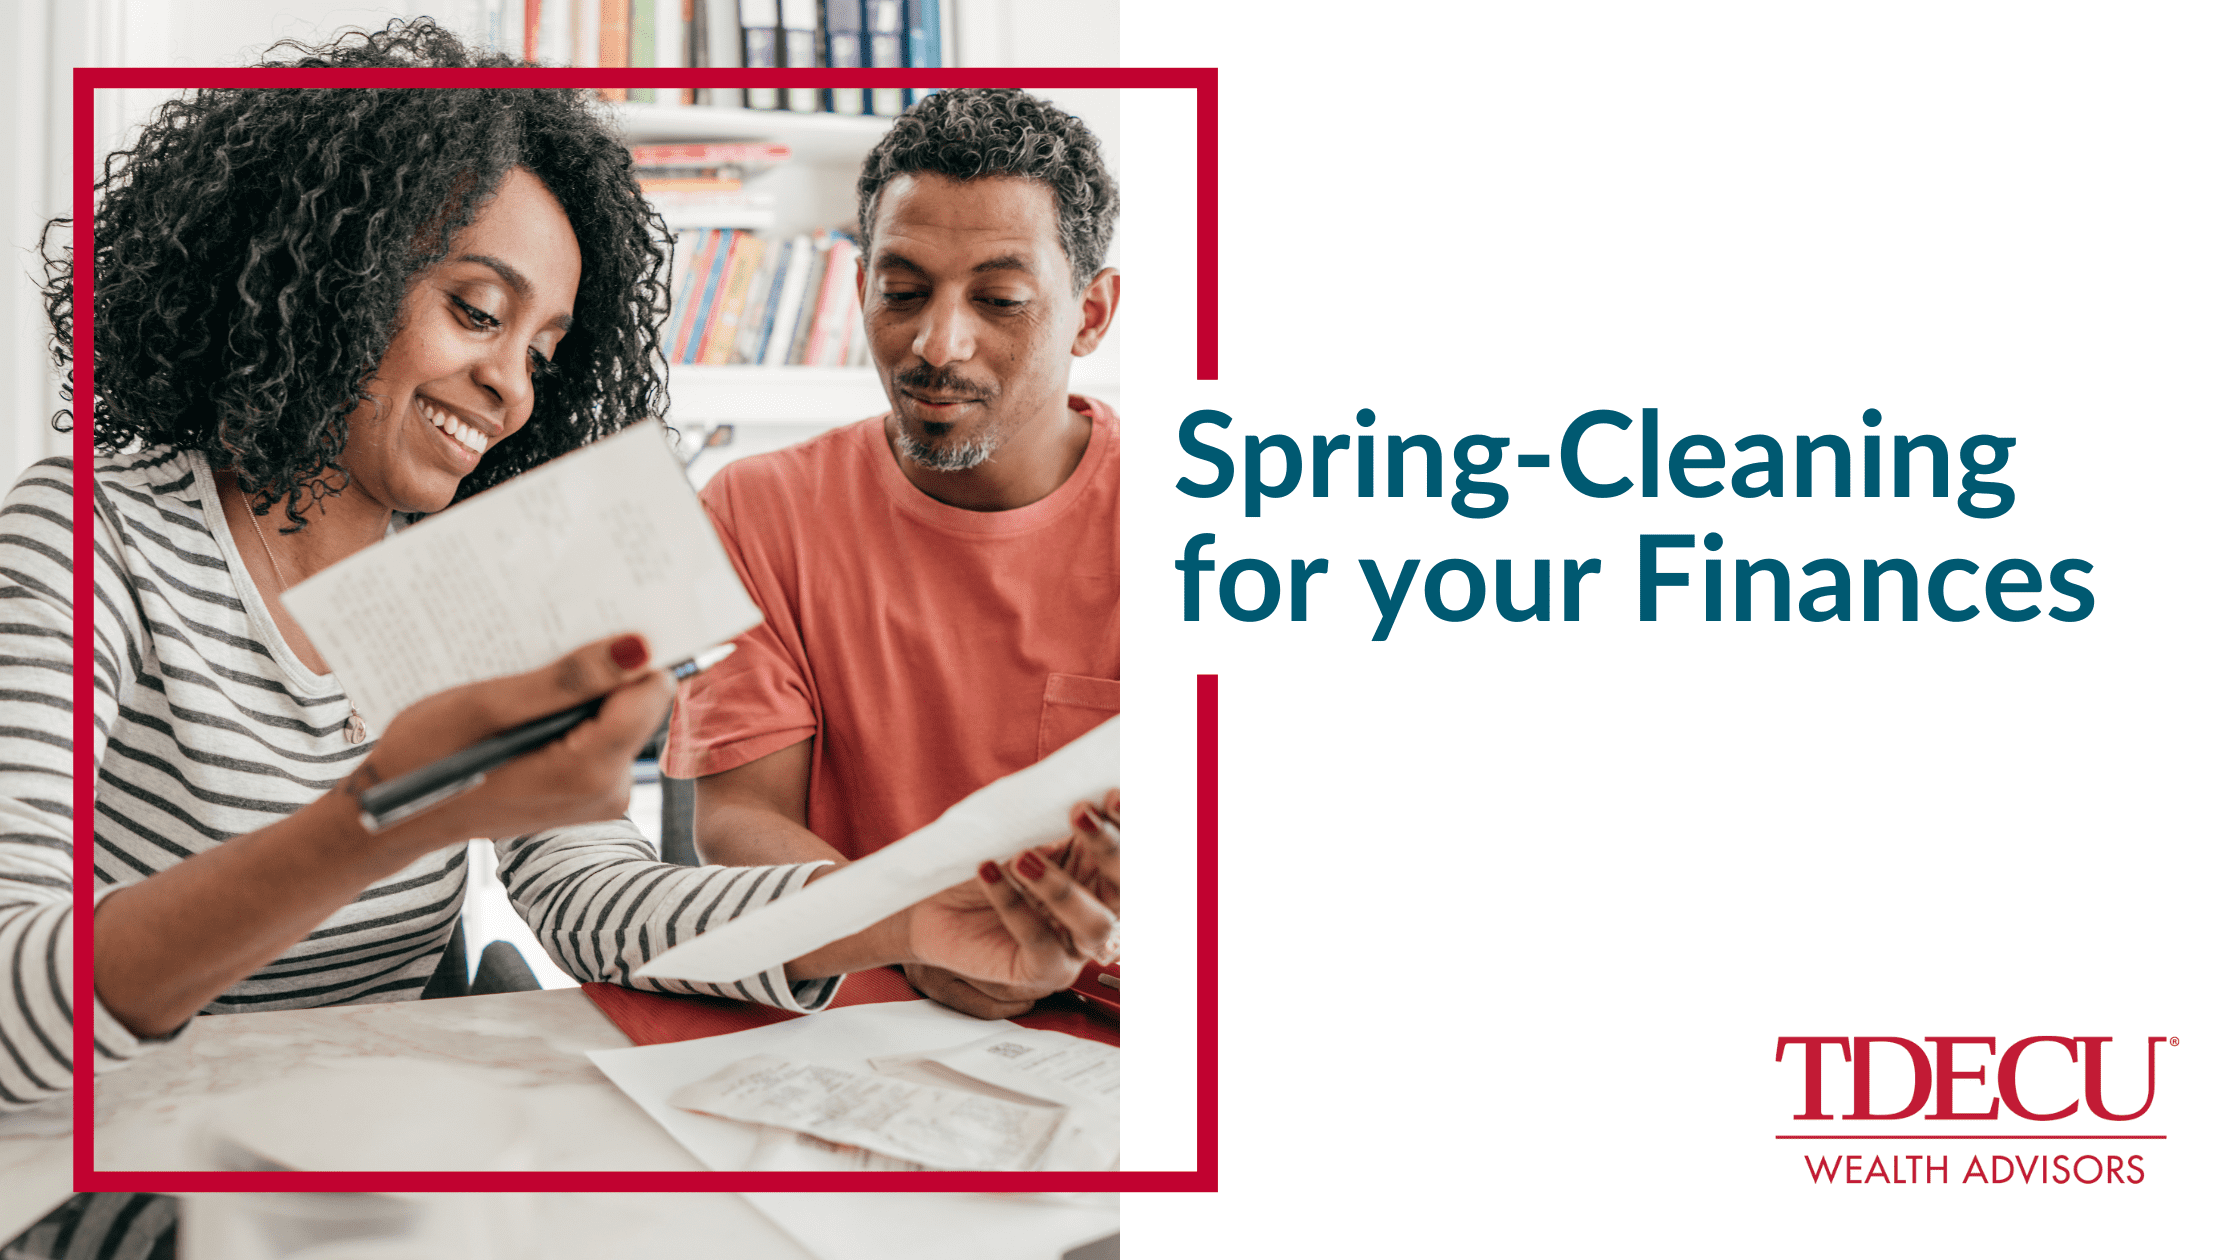 Spring-Cleaning for Your Finances